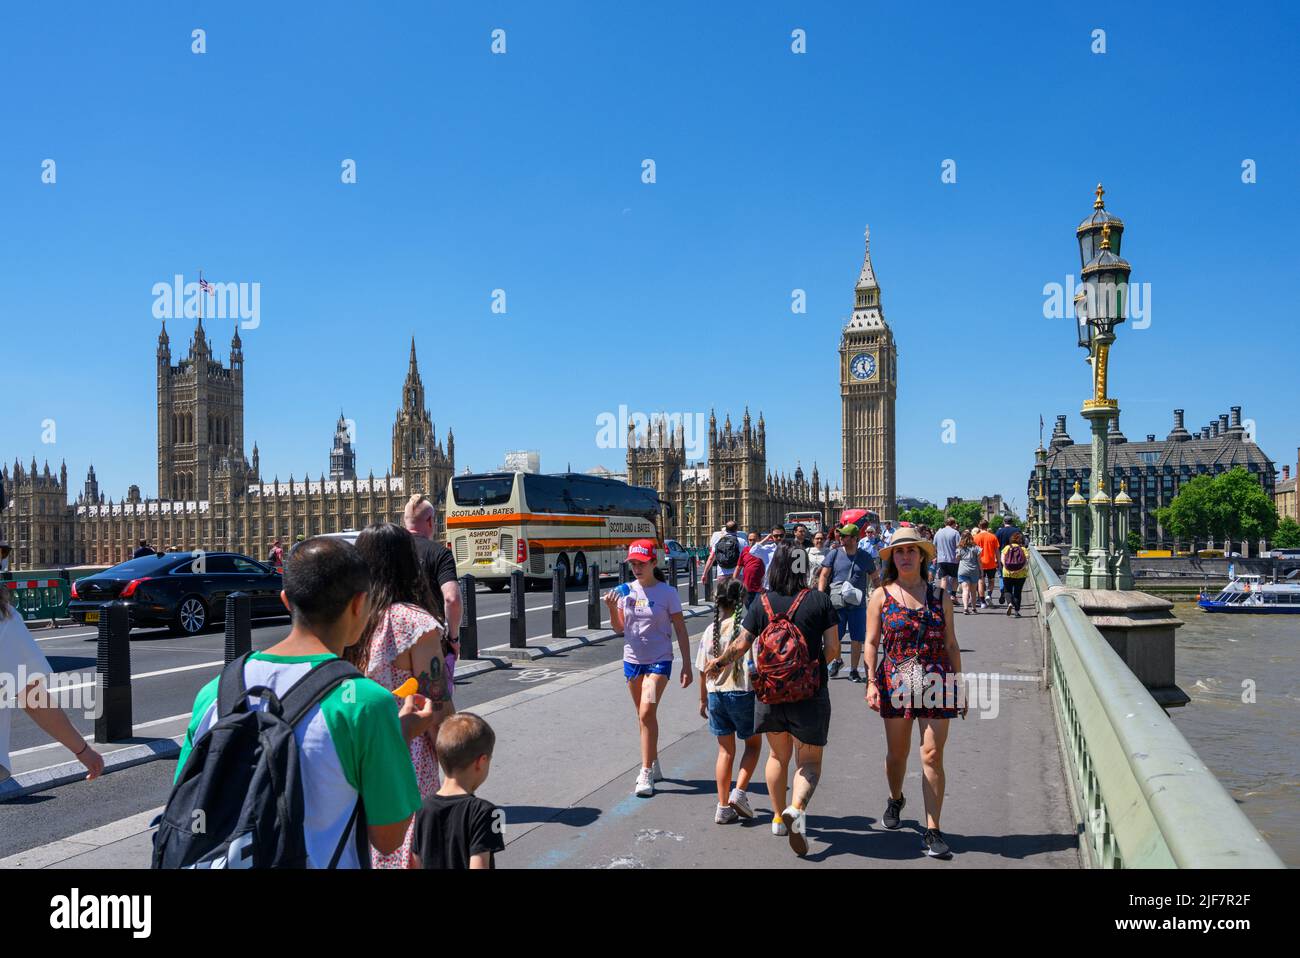 The Houses of Parliament (Palace of Westminster) from Westminster Bridge, River Thames, London, England, UK Stock Photo